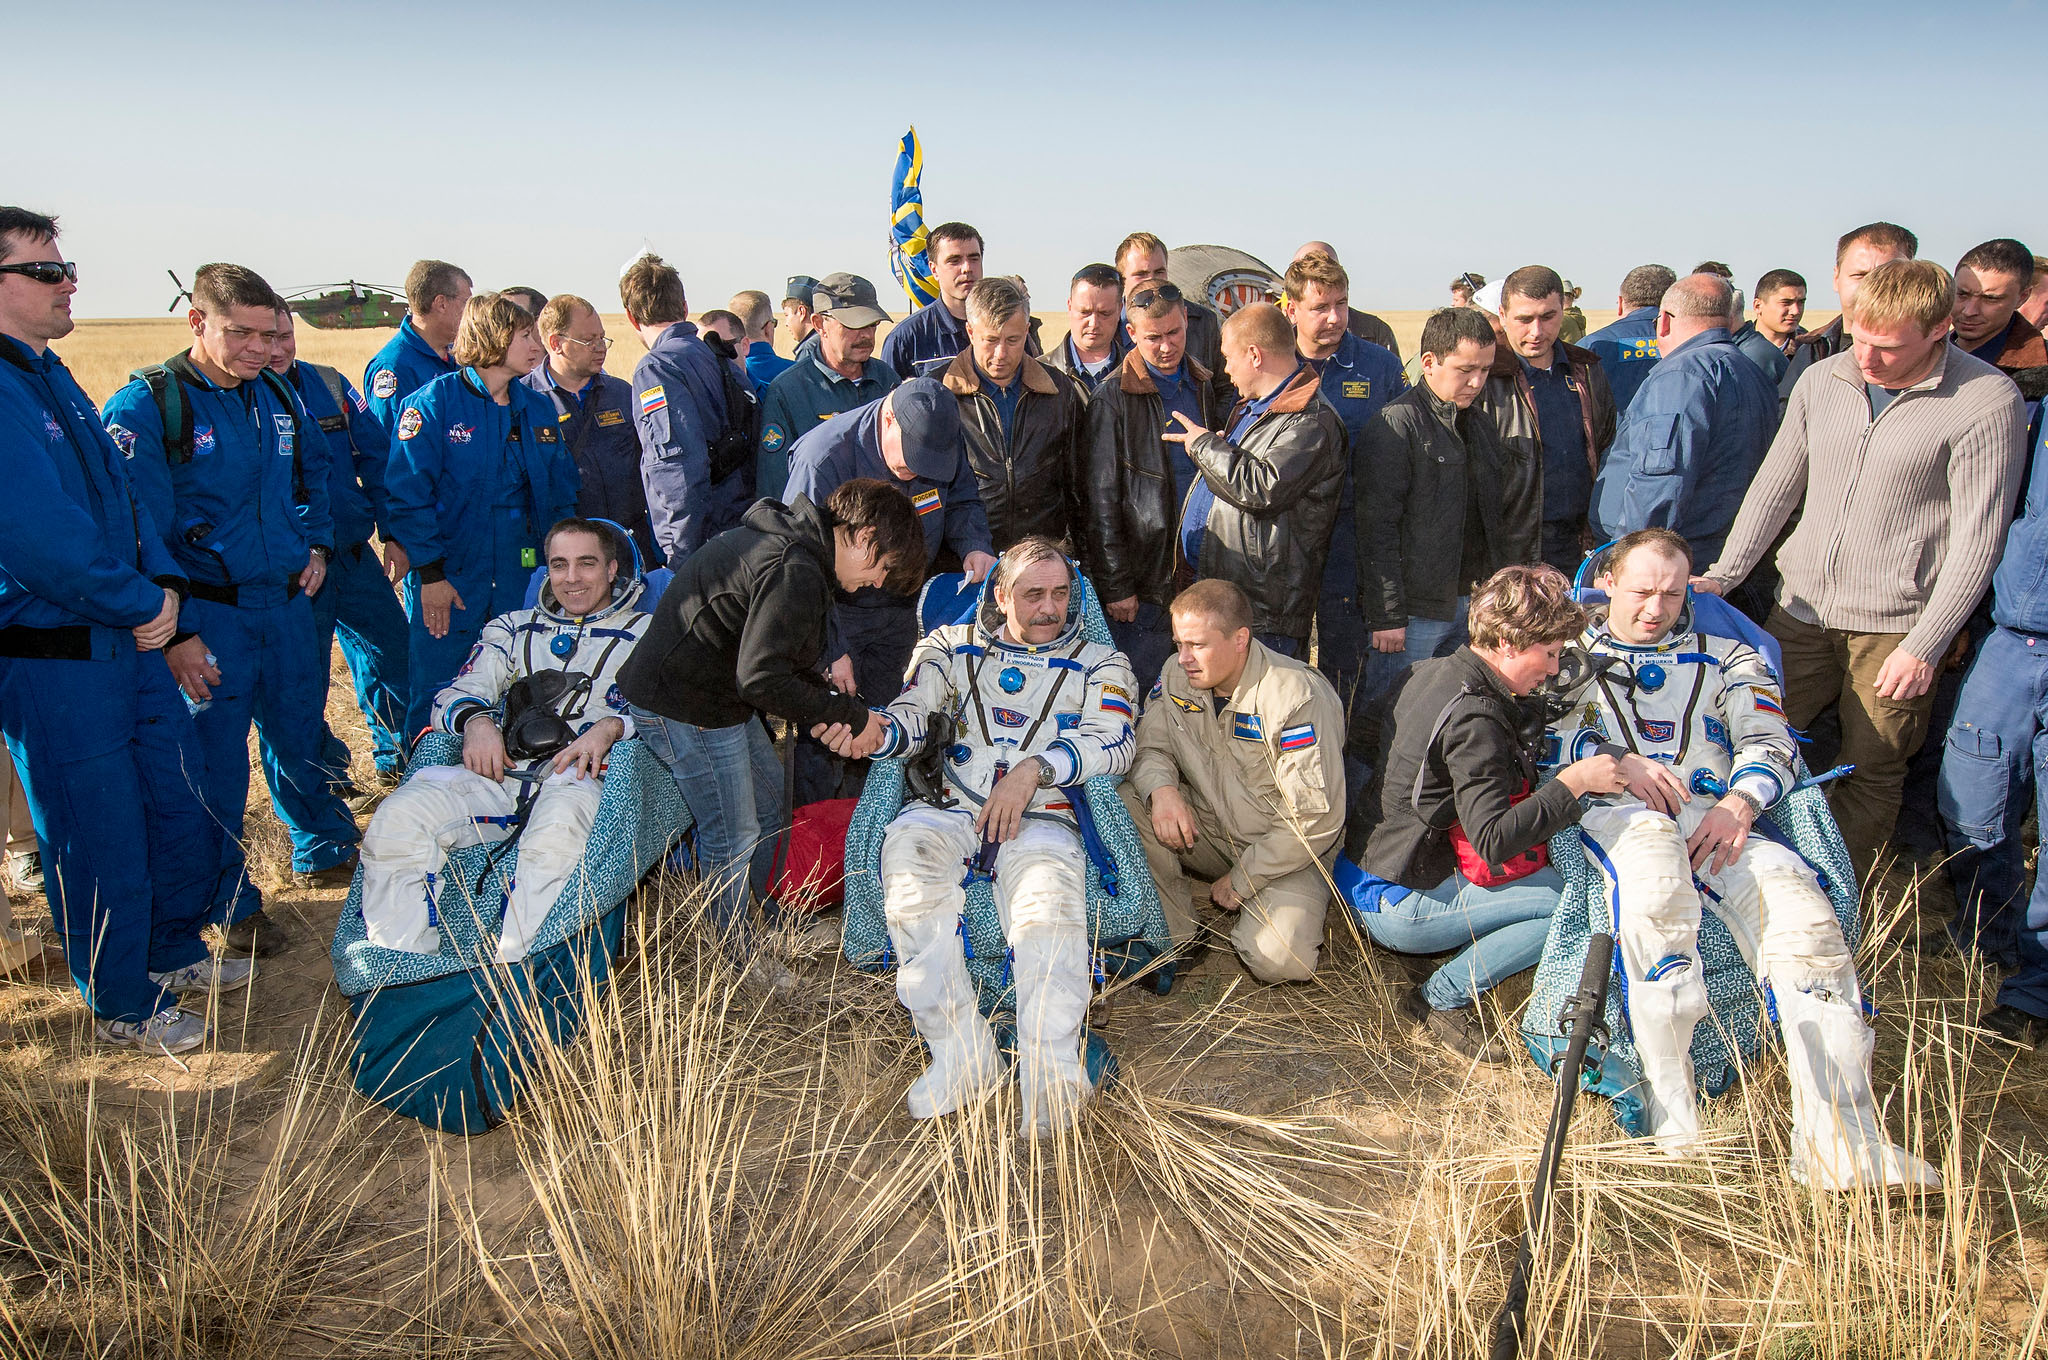 The returned Soyuz TMA-08M crew - from left, Chris Cassidy, Pavel Vinogradov and Aleksandr Misurkin - begin the process of readjusting to Earth's gravity after touchdown. They are surrounded by recovery personnel, friends and colleagues. NASA Chief Astronaut Bob Behnken is visible, second from left. Photo Credit: NASA